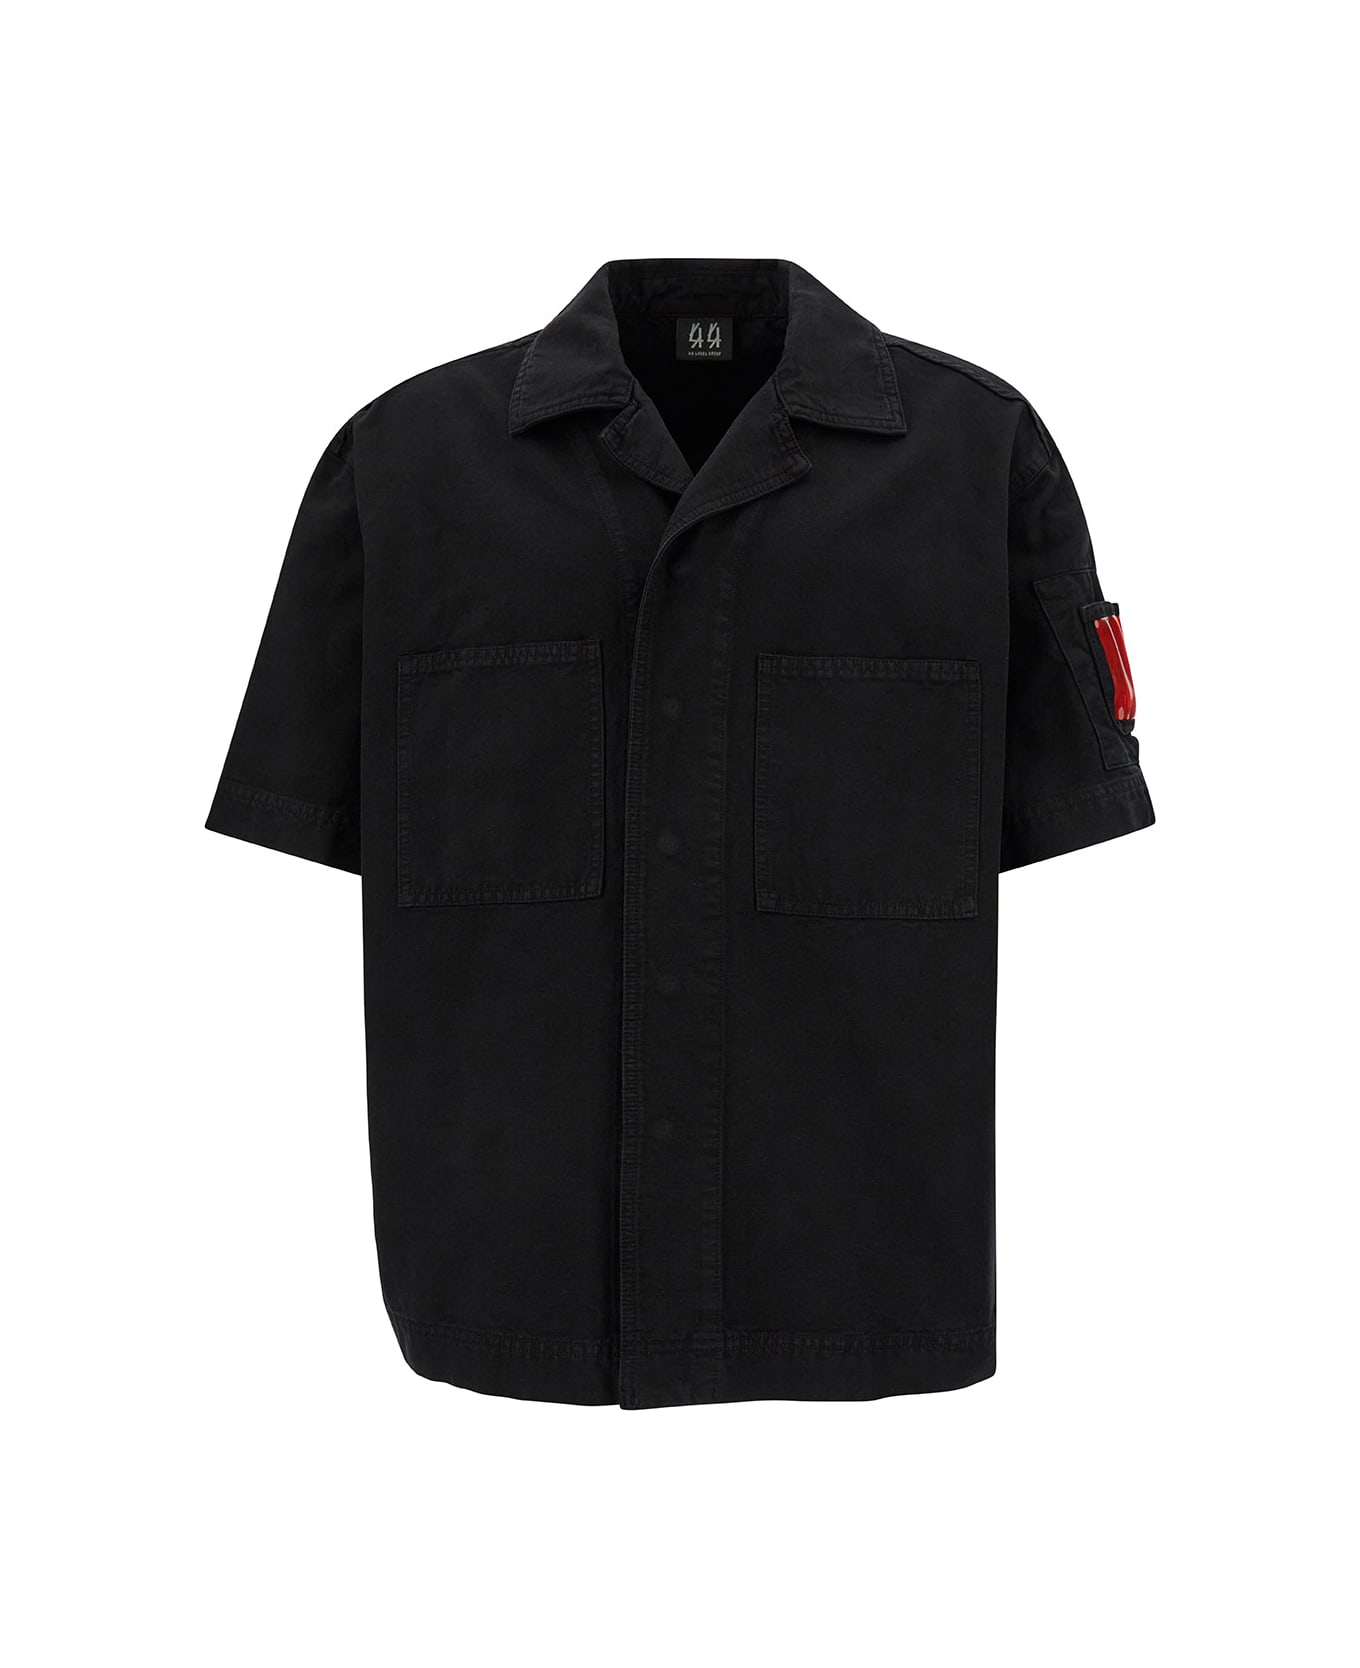 44 Label Group Black Bowling Shirt With Logo Patch In Cotton Denim Man - Black シャツ